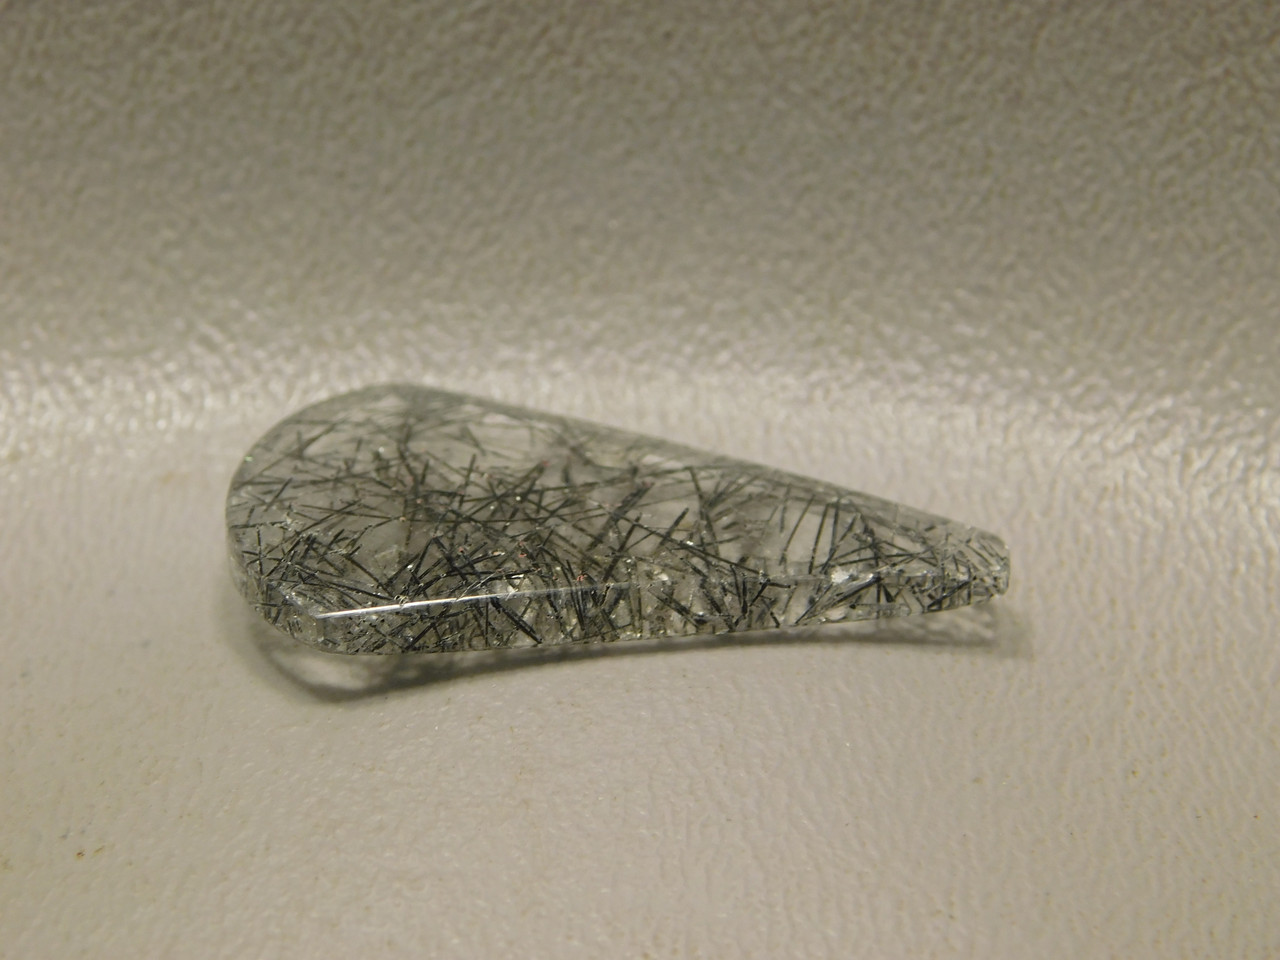 Tourmalined Quartz Included Loose Stone Jewelry Cabochon #15